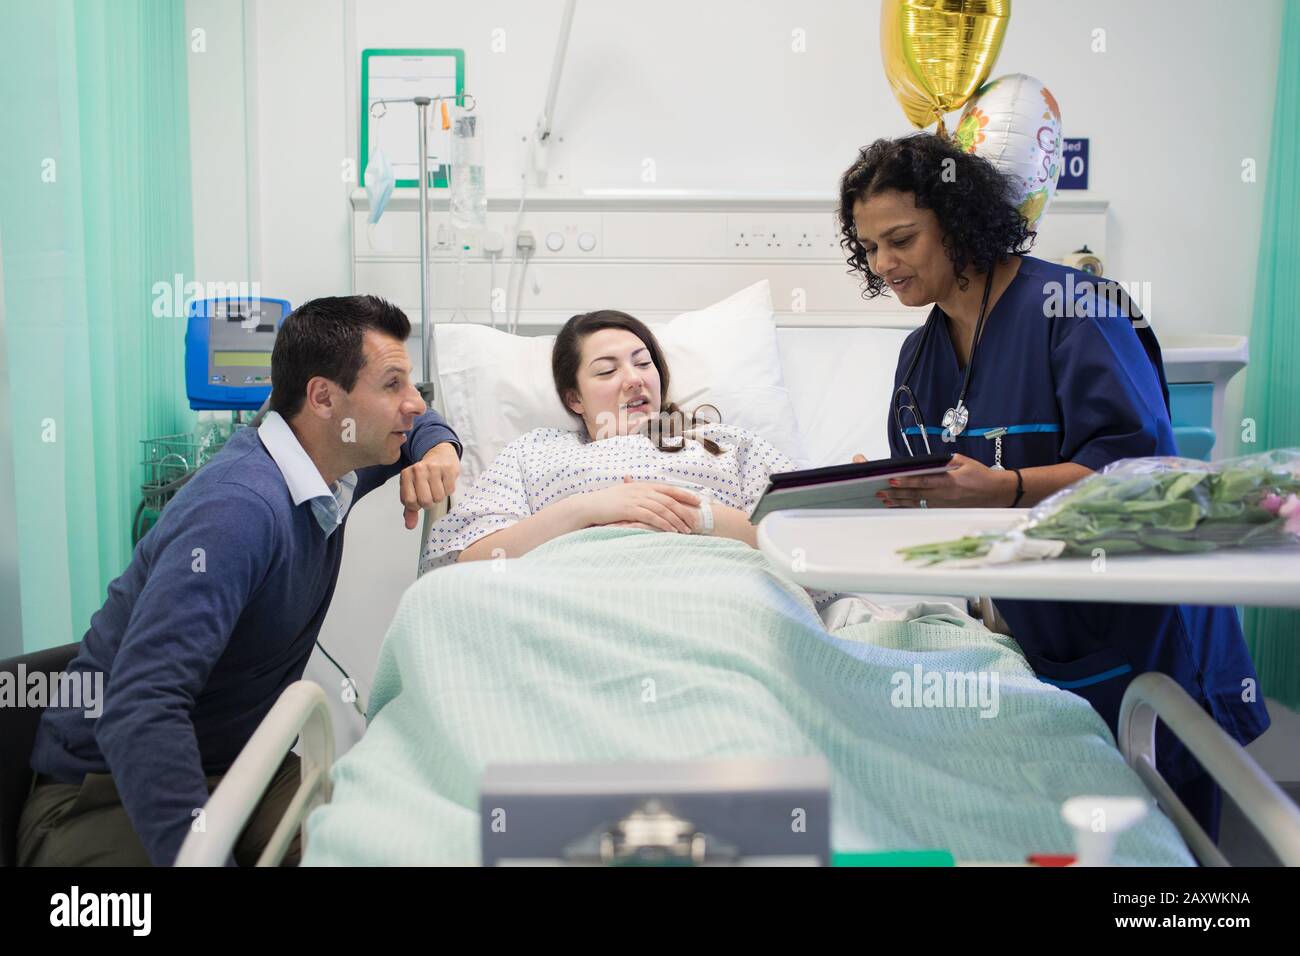 Doctor with digital tablet making rounds, talking with couple in hospital room Stock Photo